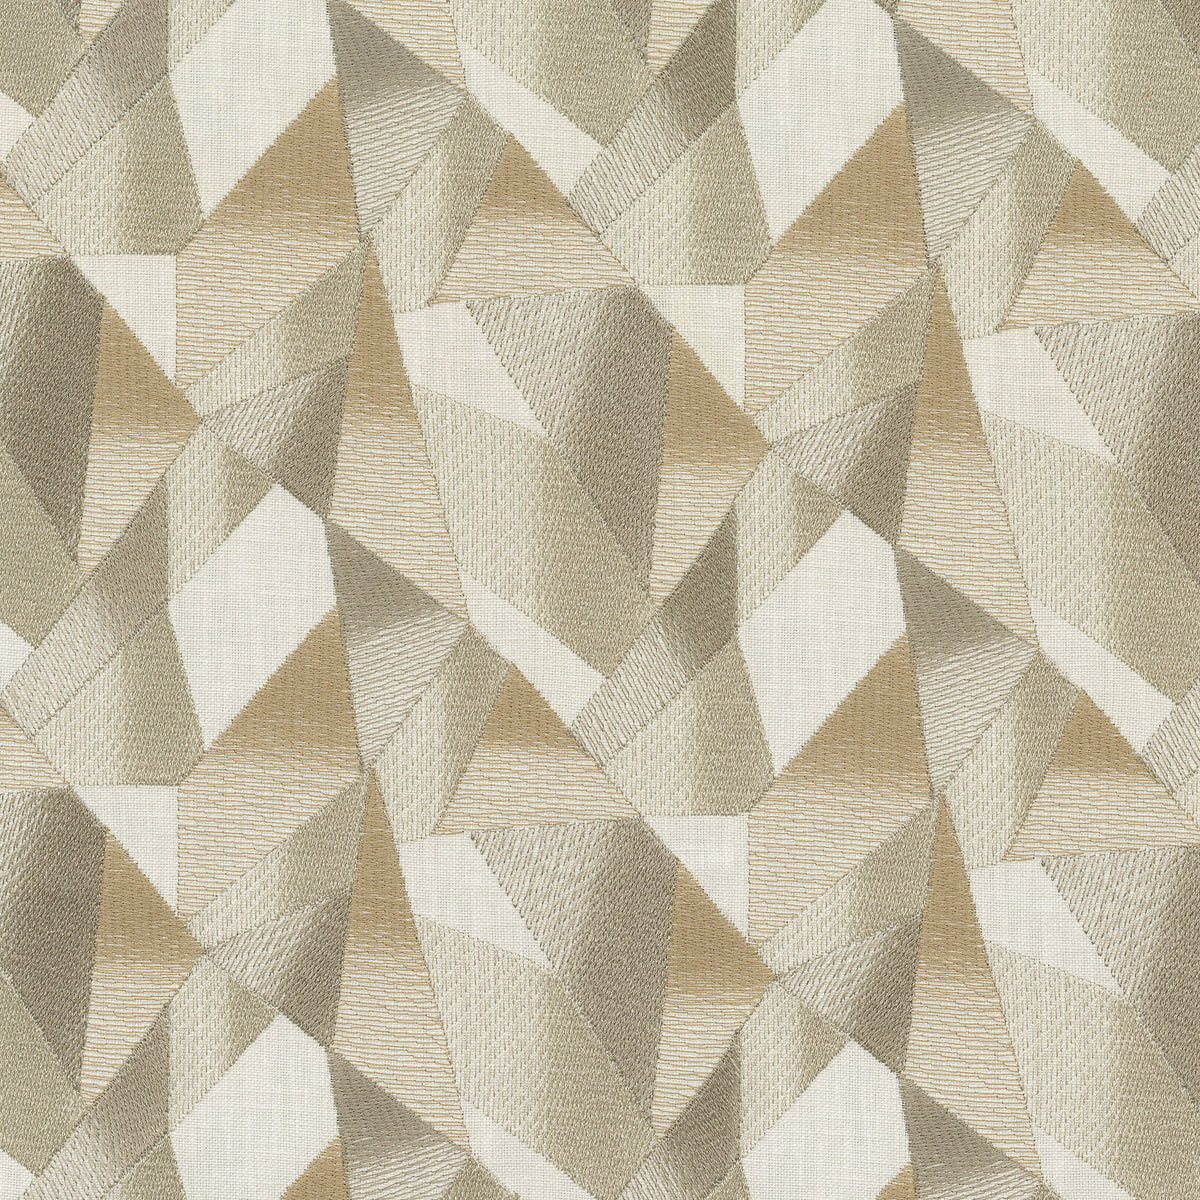 P/K Lifestyles Prism Embroidery - Quartz 411442 Upholstery Fabric